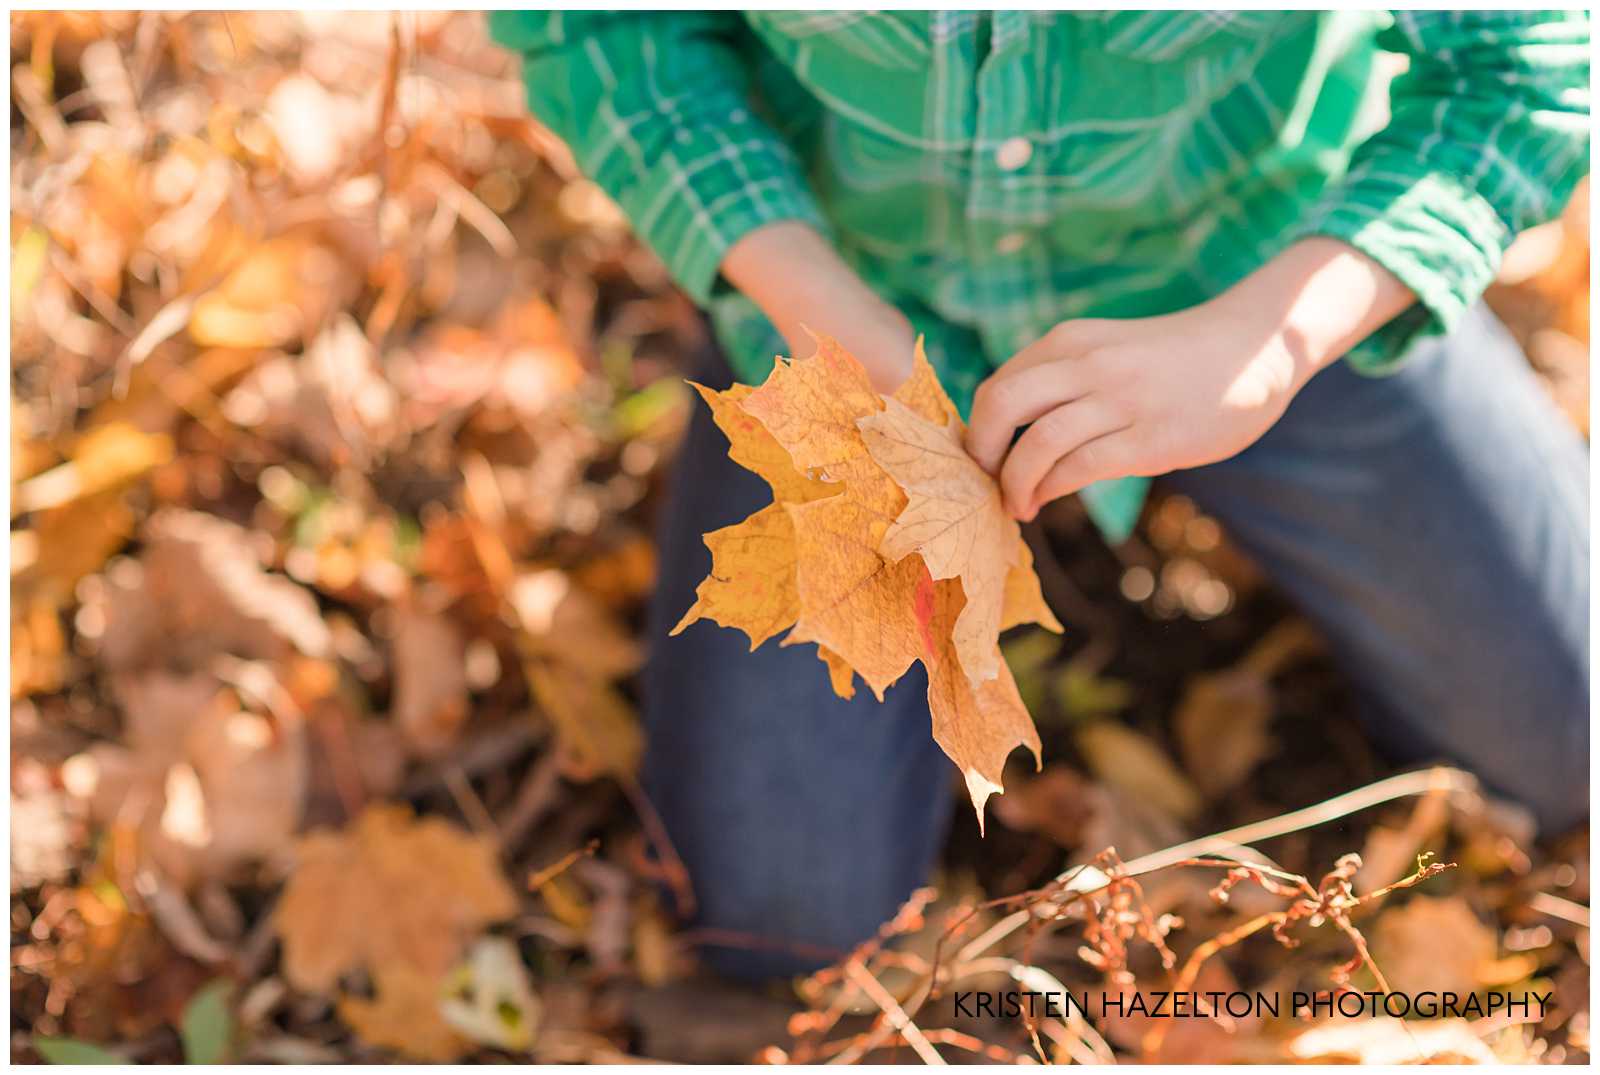 Young boy crouched on the ground picking up leaves